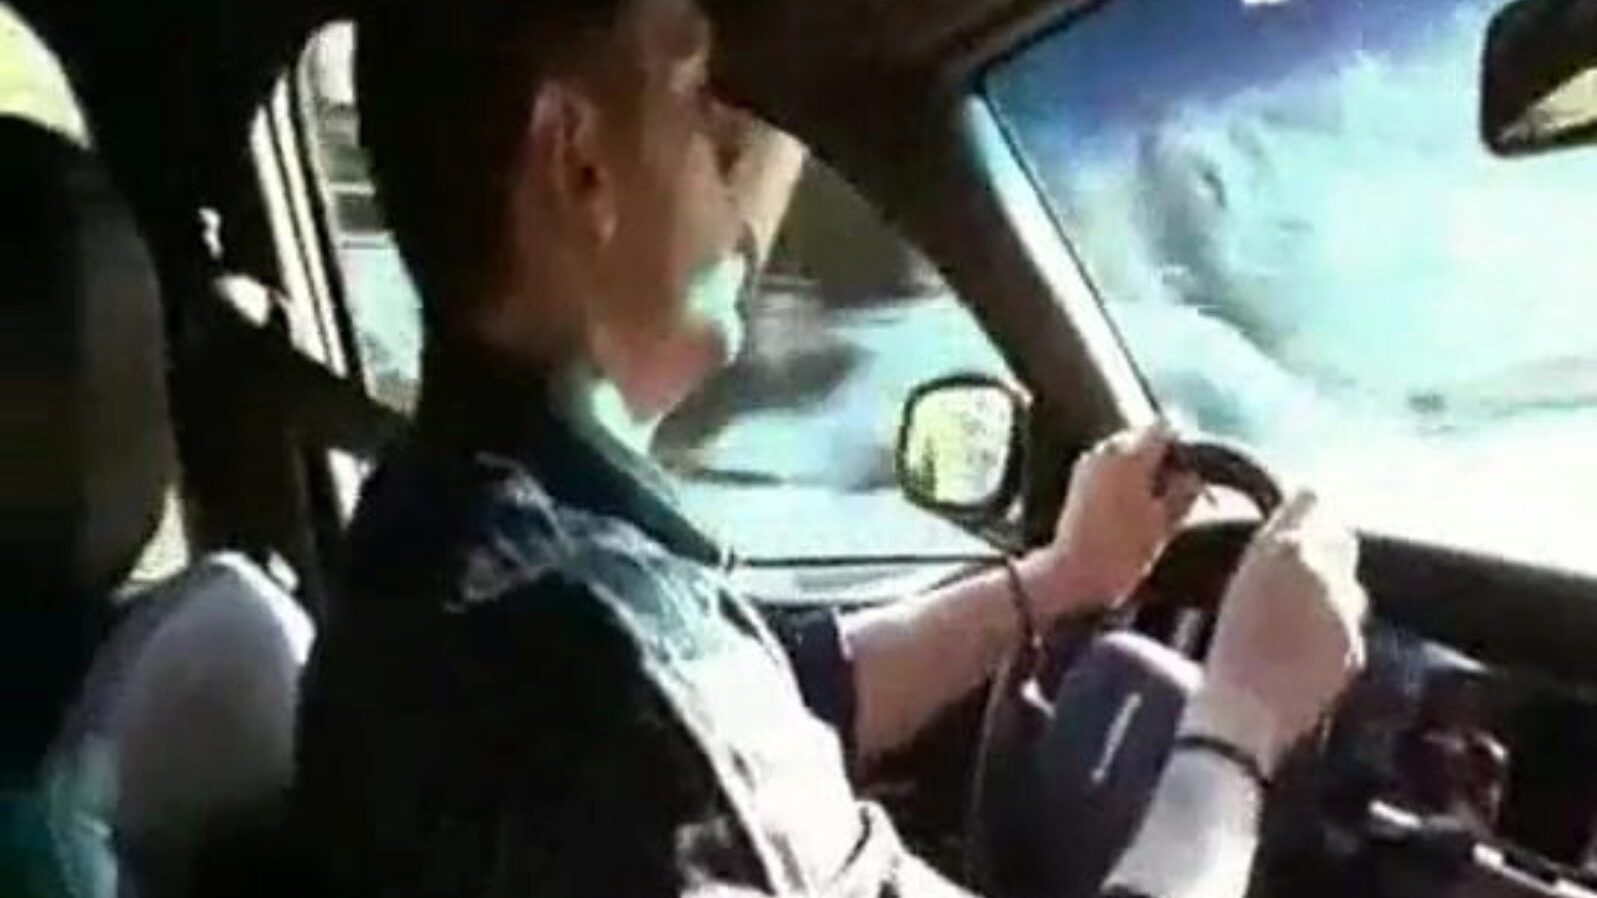 Driver bonks breasty chief